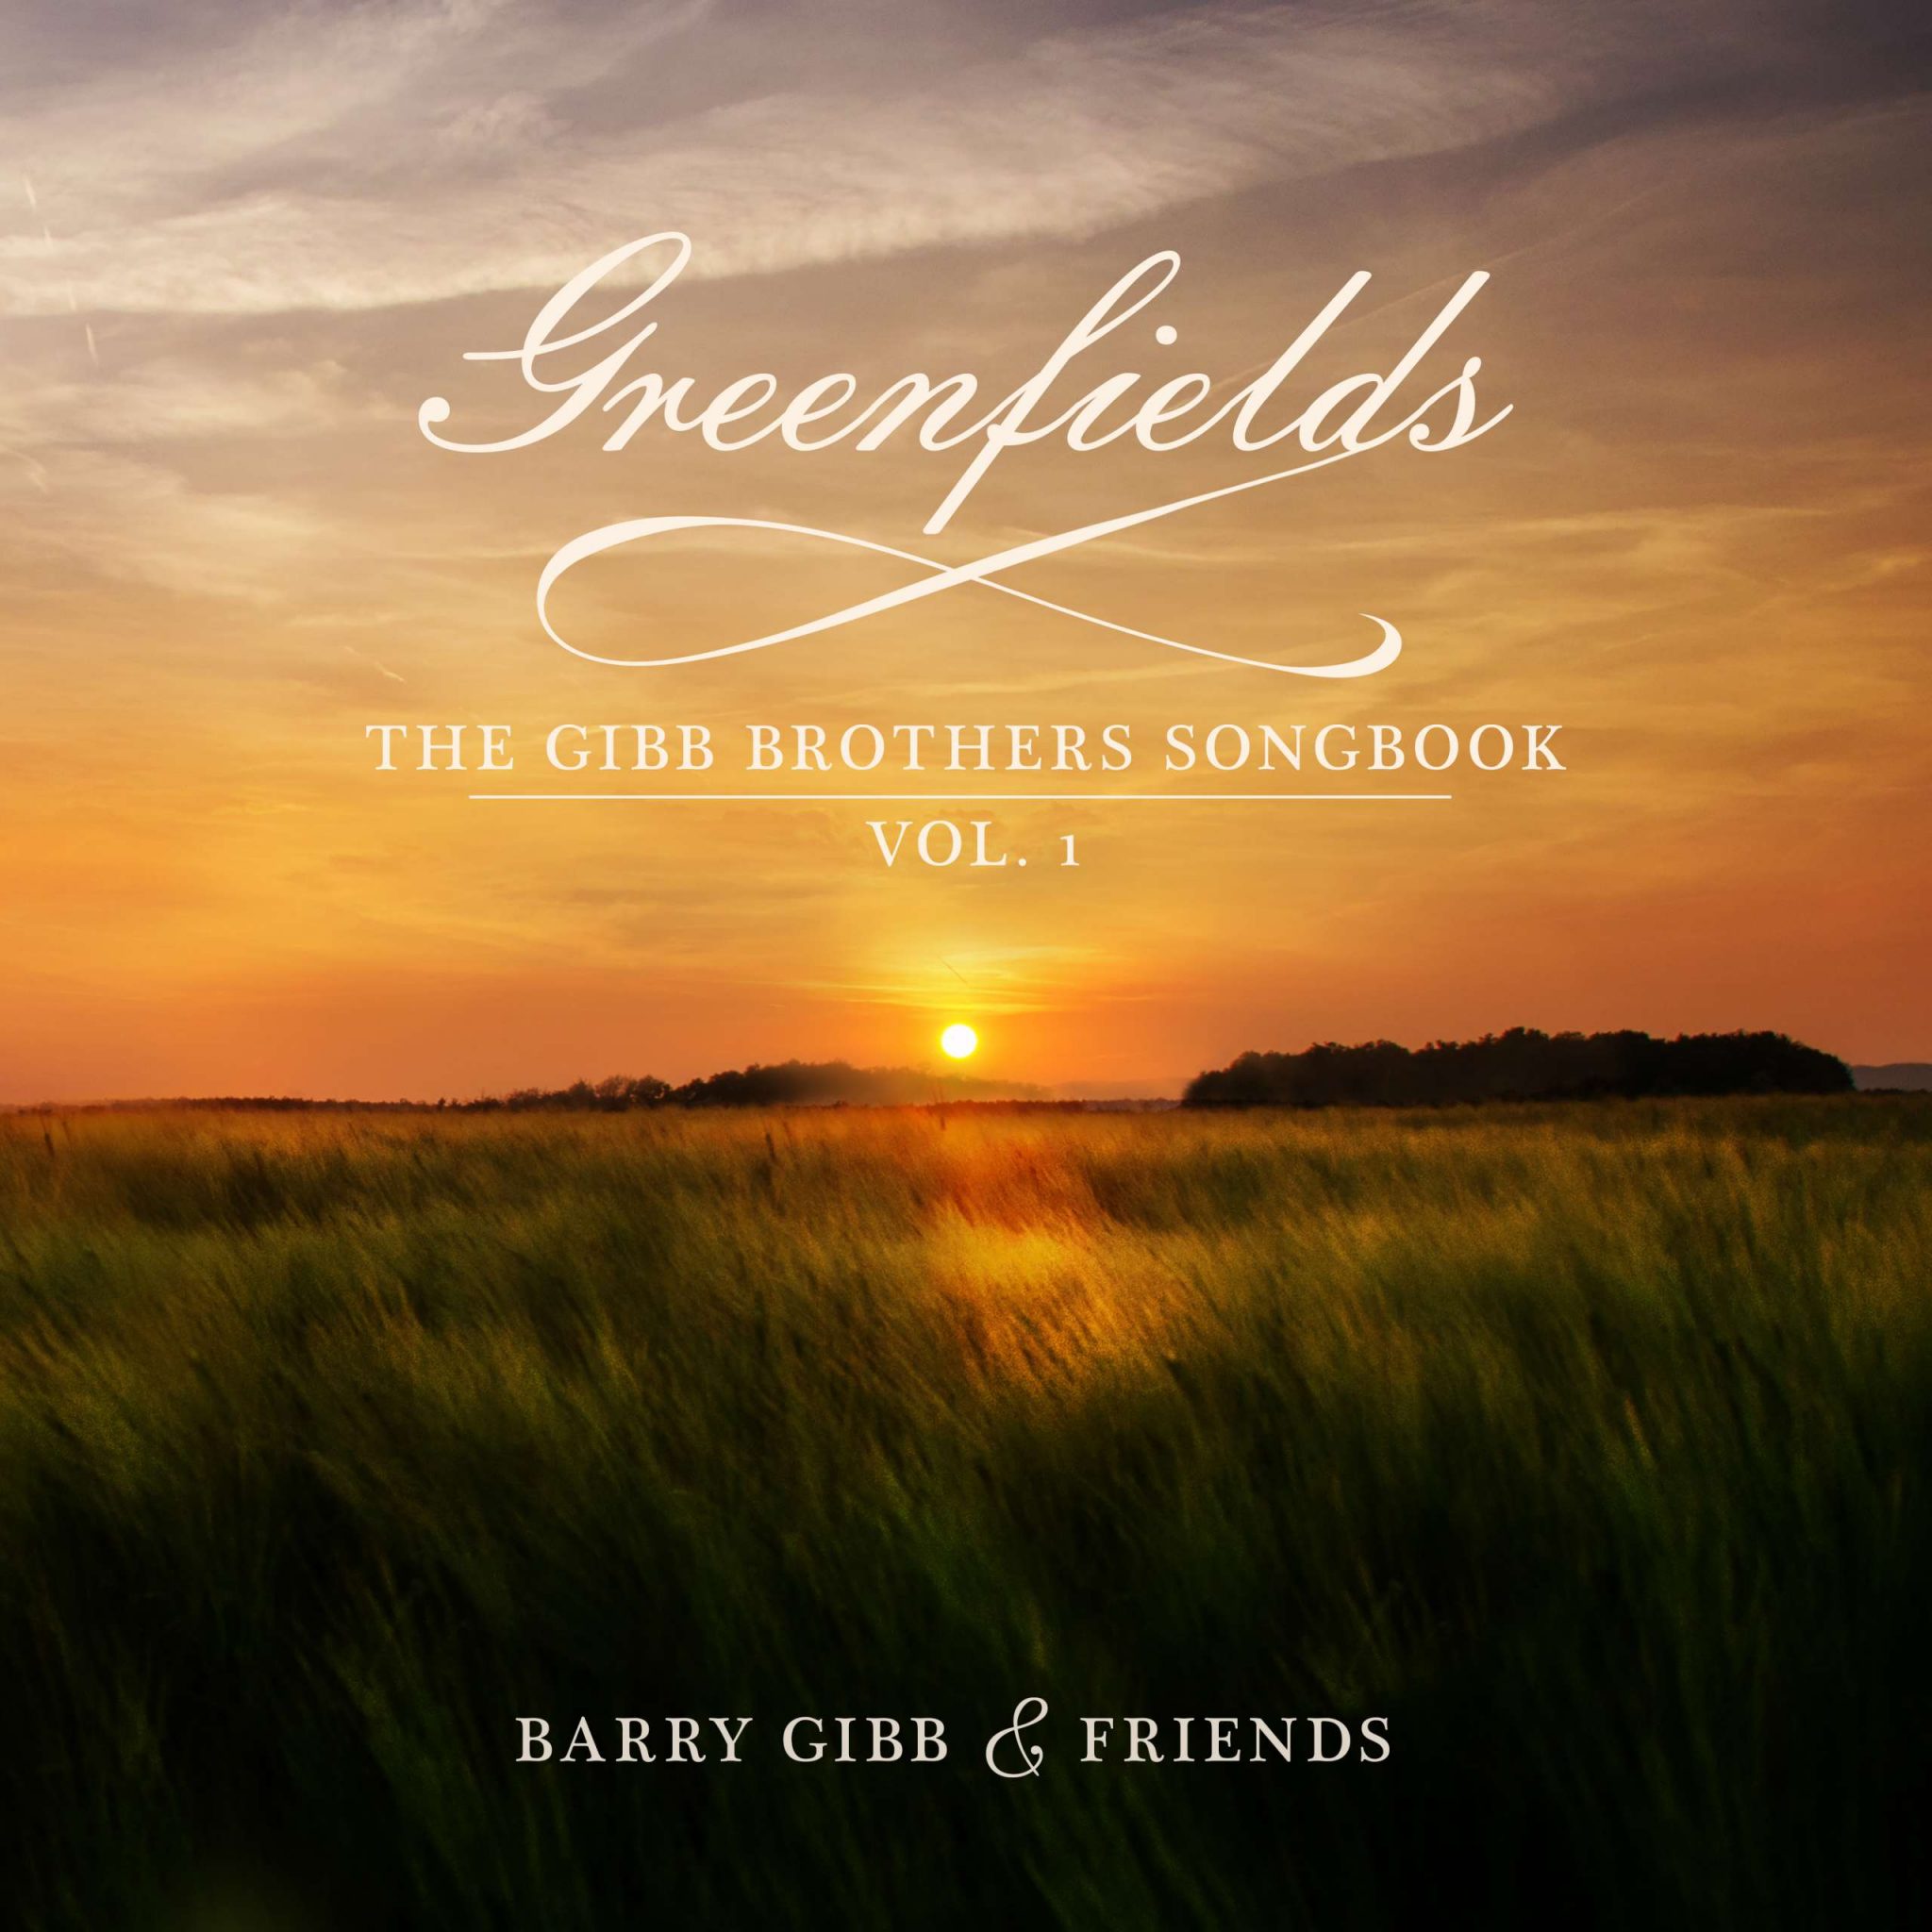 BARRY GIBB AND FRIENDS – GREENFIELDS